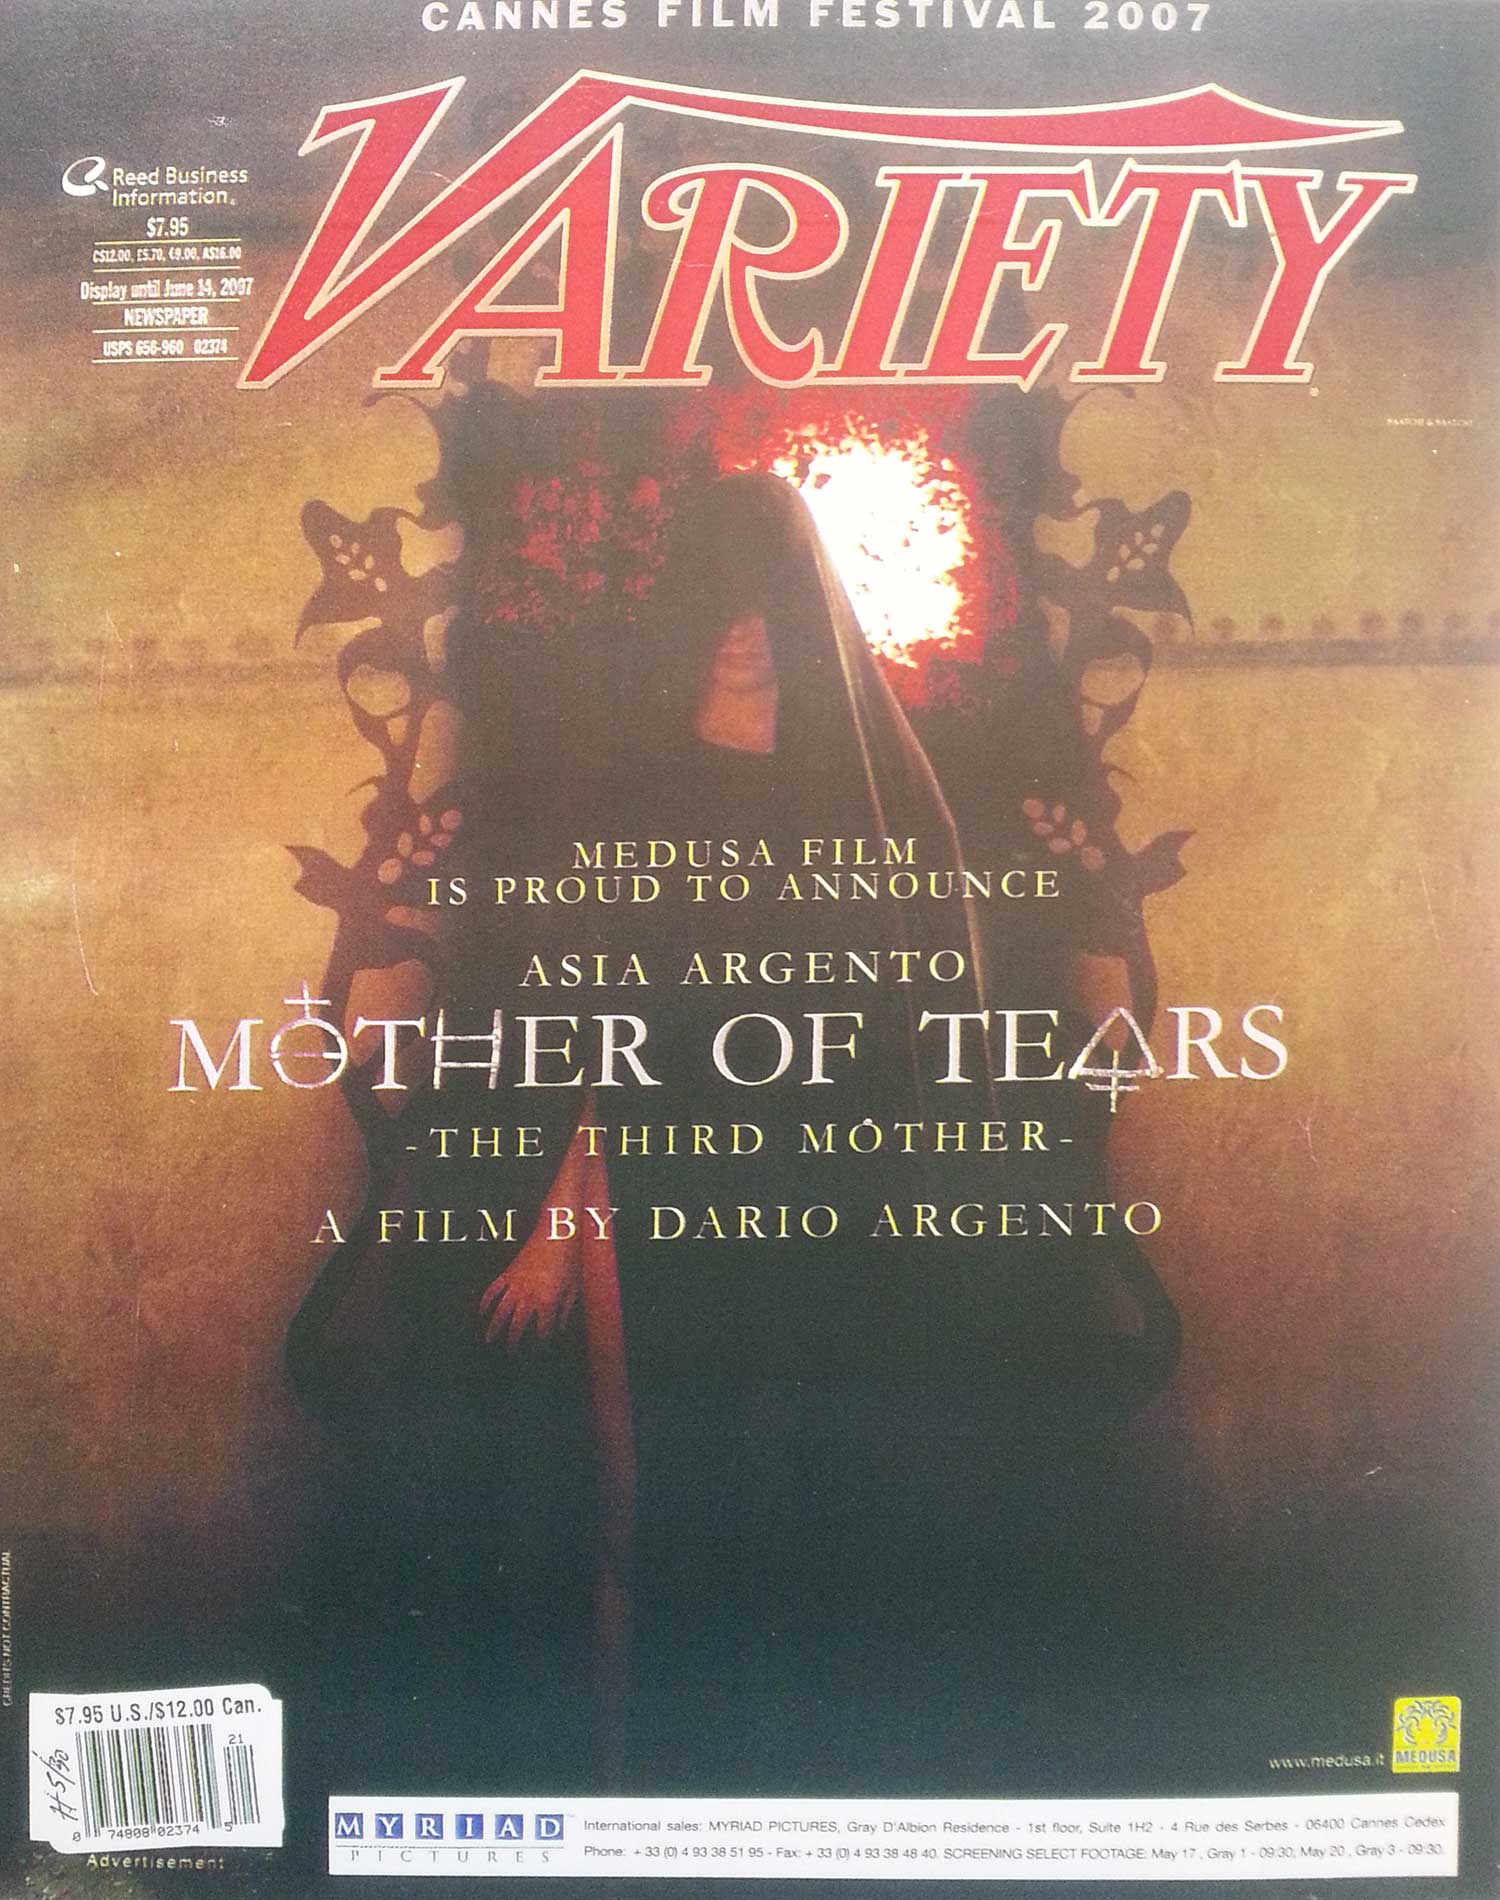 Cover Variety with Mother of Tears.jpg